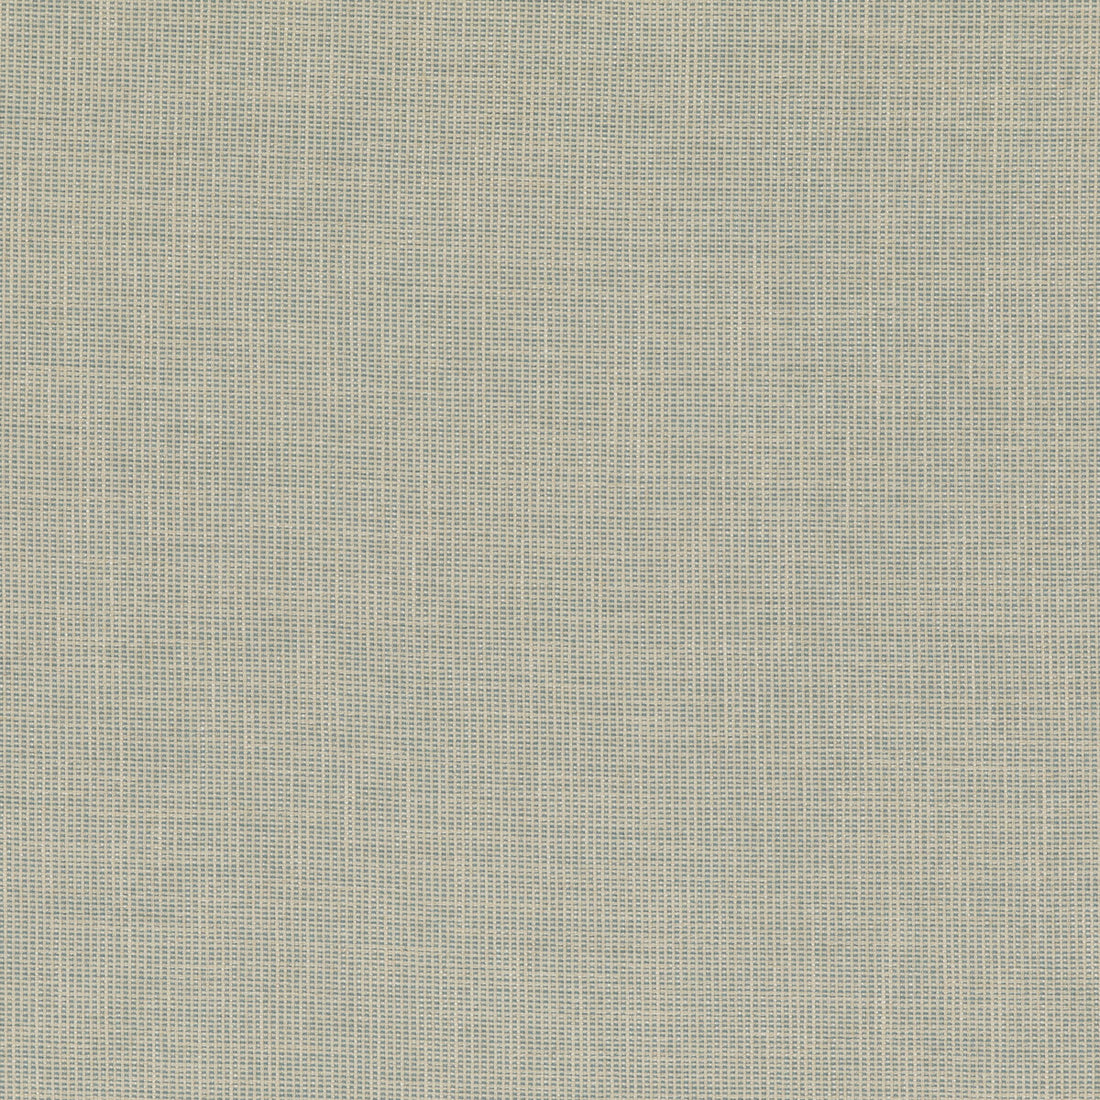 Folly fabric in soft blue color - pattern PF50487.605.0 - by Baker Lifestyle in the Block Party collection